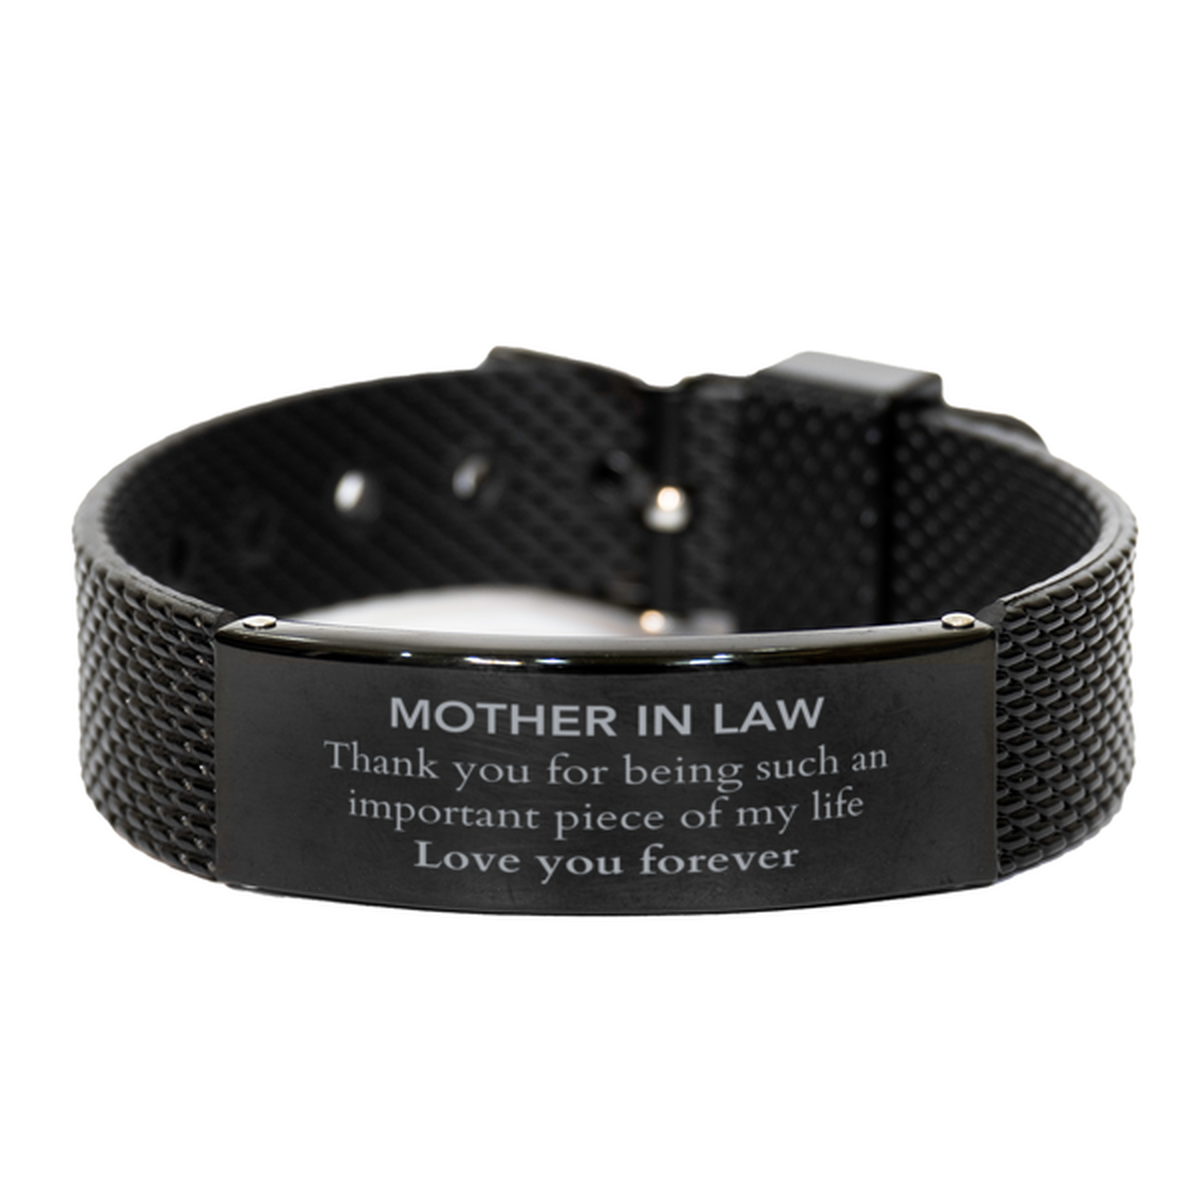 Appropriate Mother In Law Black Shark Mesh Bracelet Epic Birthday Gifts for Mother In Law Thank you for being such an important piece of my life Mother In Law Christmas Mothers Fathers Day